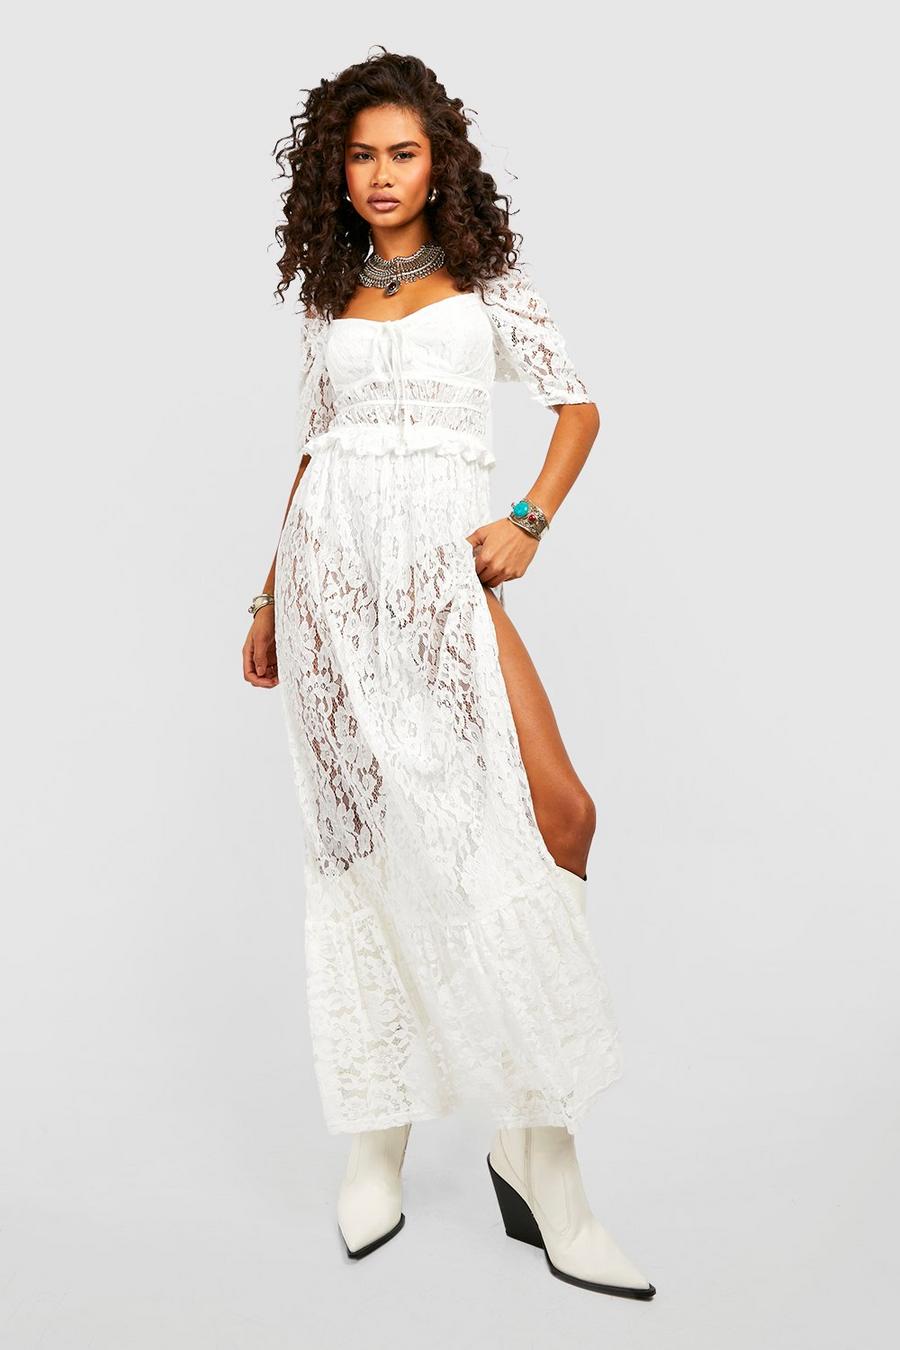 White Lace Dresses for Women - Up to 70% off